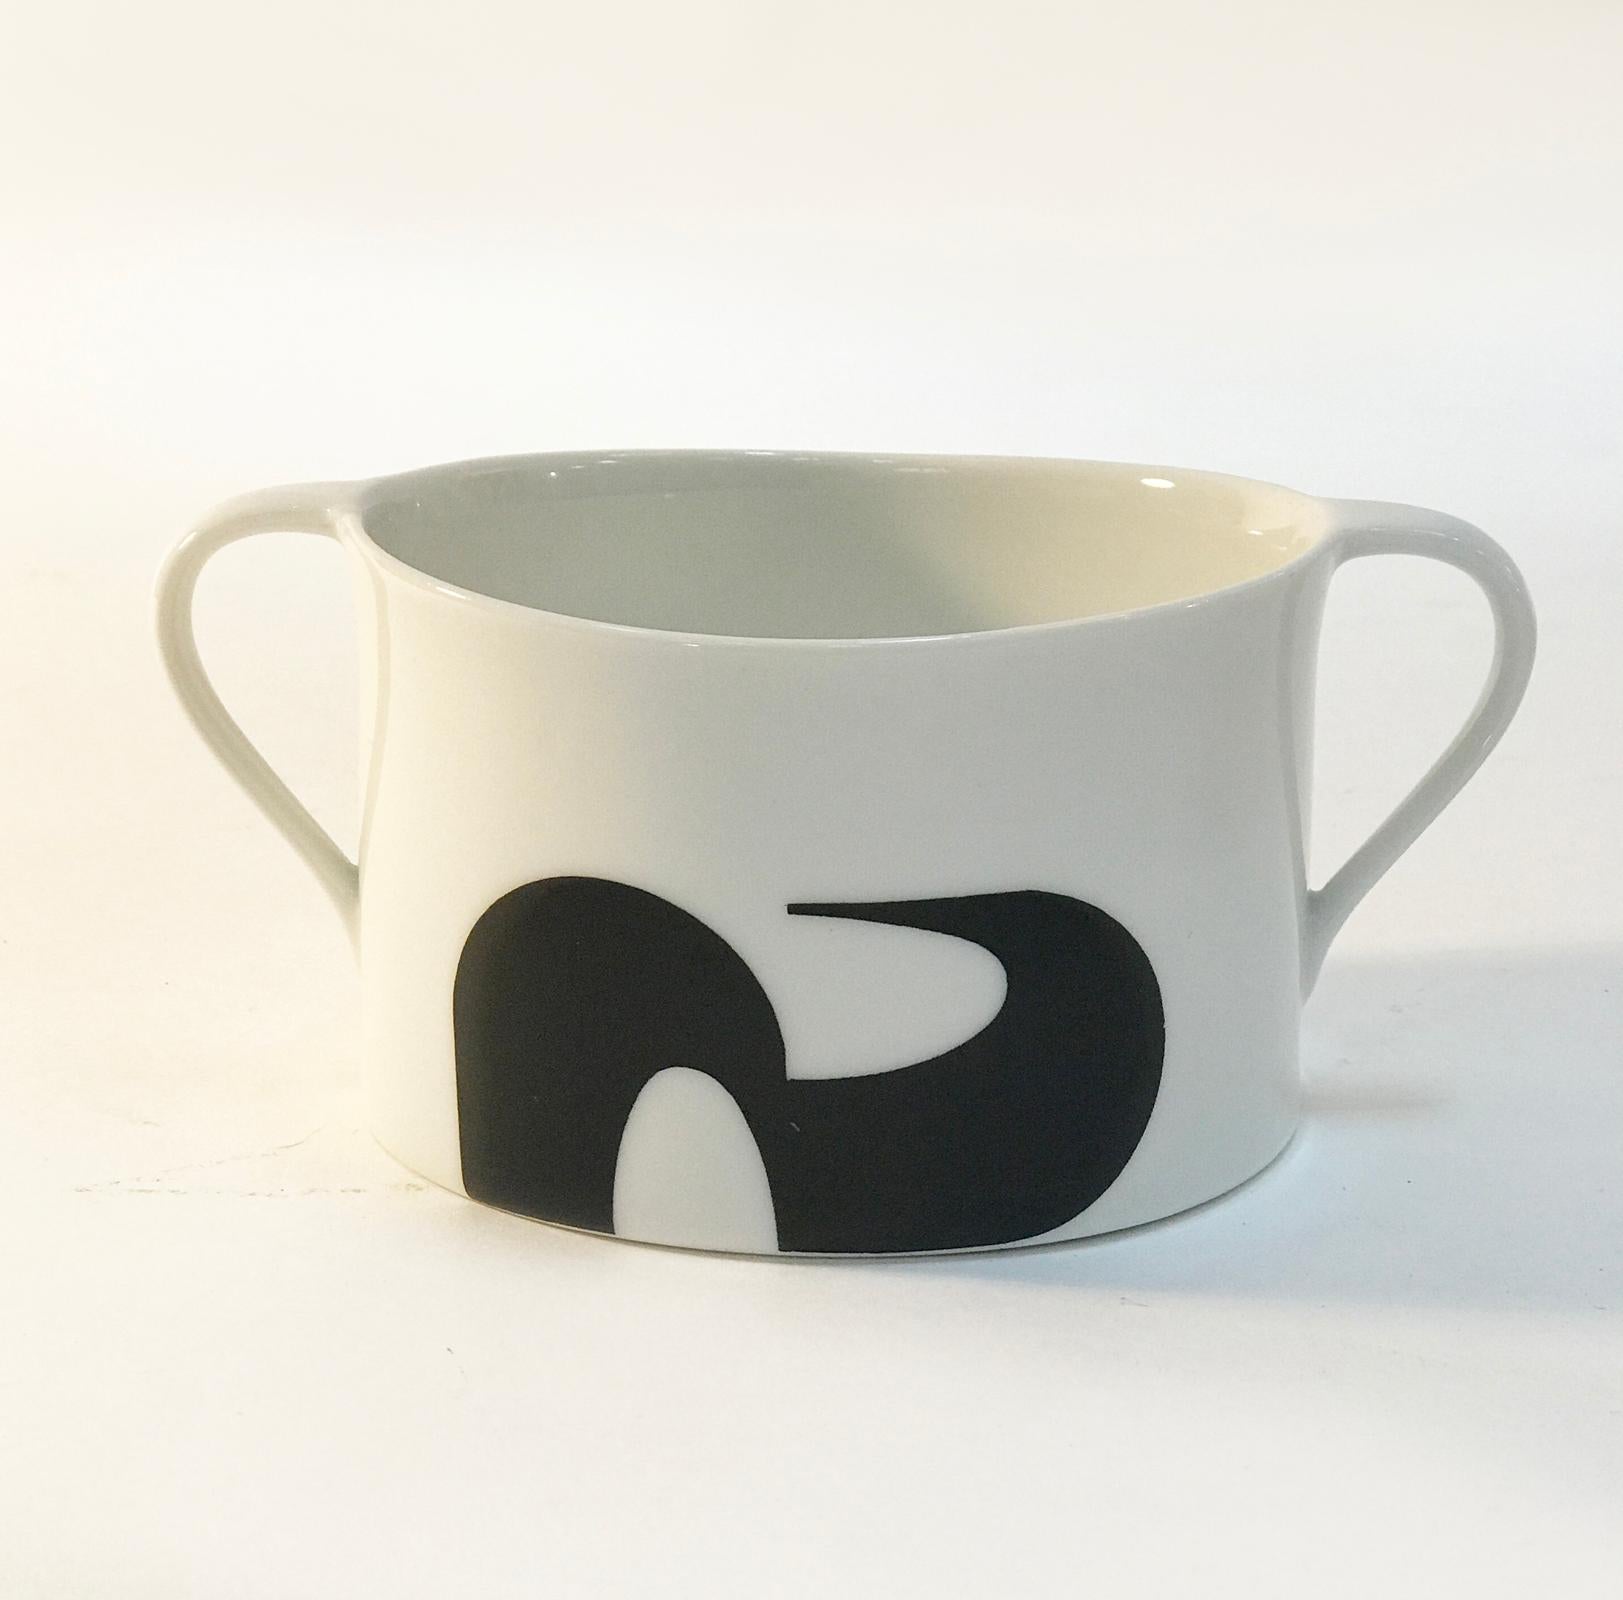 Set of 6 soup bowls and 6 oval plates designed by Spanish Artist Manuel Barbadillo for Bidasoa, great quality white porcelain with abstract computer design pattern clearly inspired in Artists earlier painting, ´Composición Modular´.

Manuel